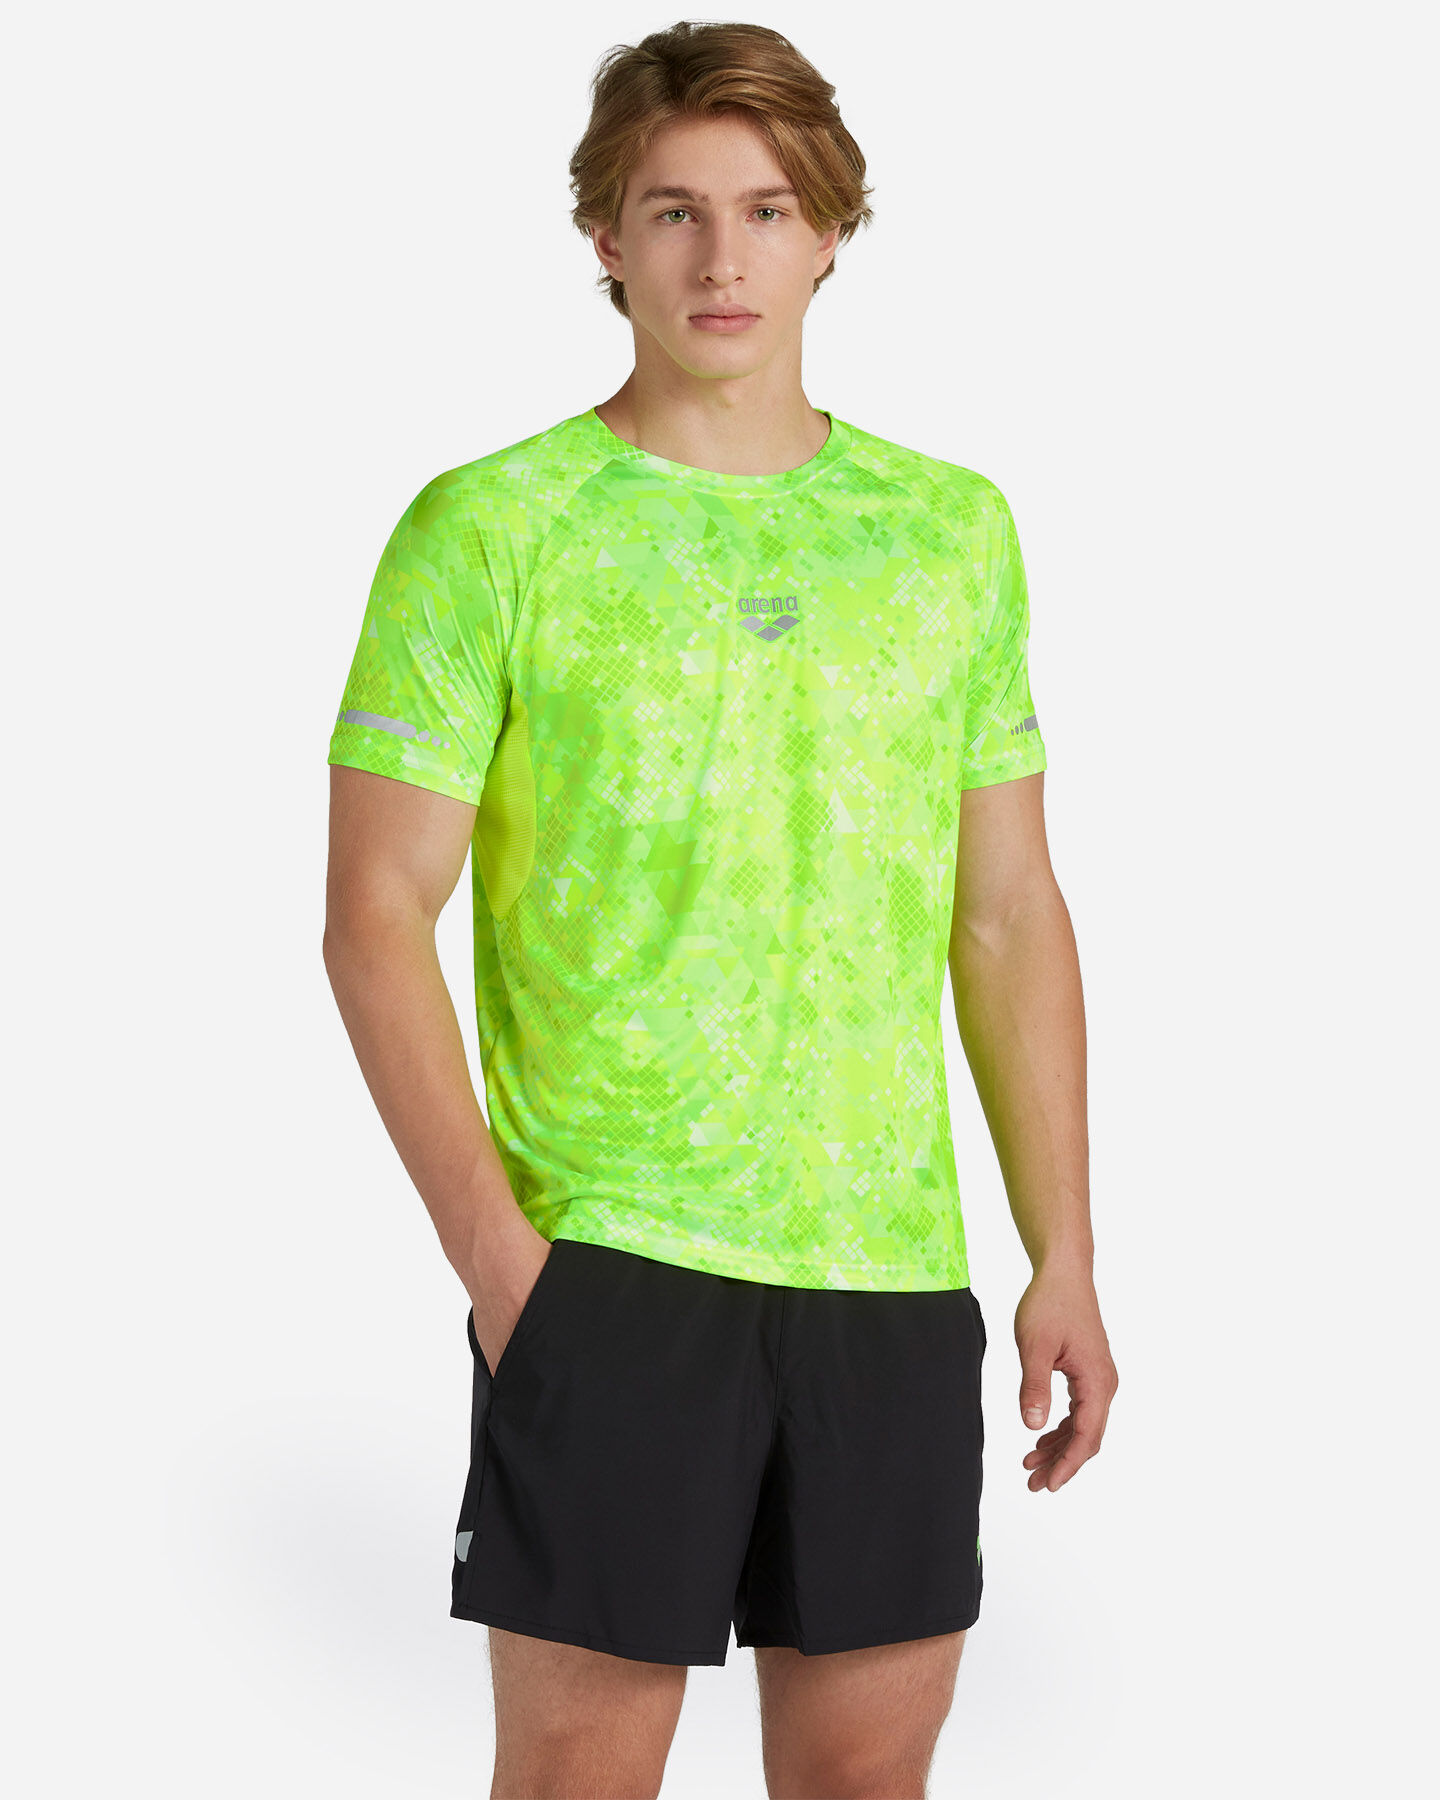  T-Shirt running ARENA AOP M S4106354|1005|S scatto 0